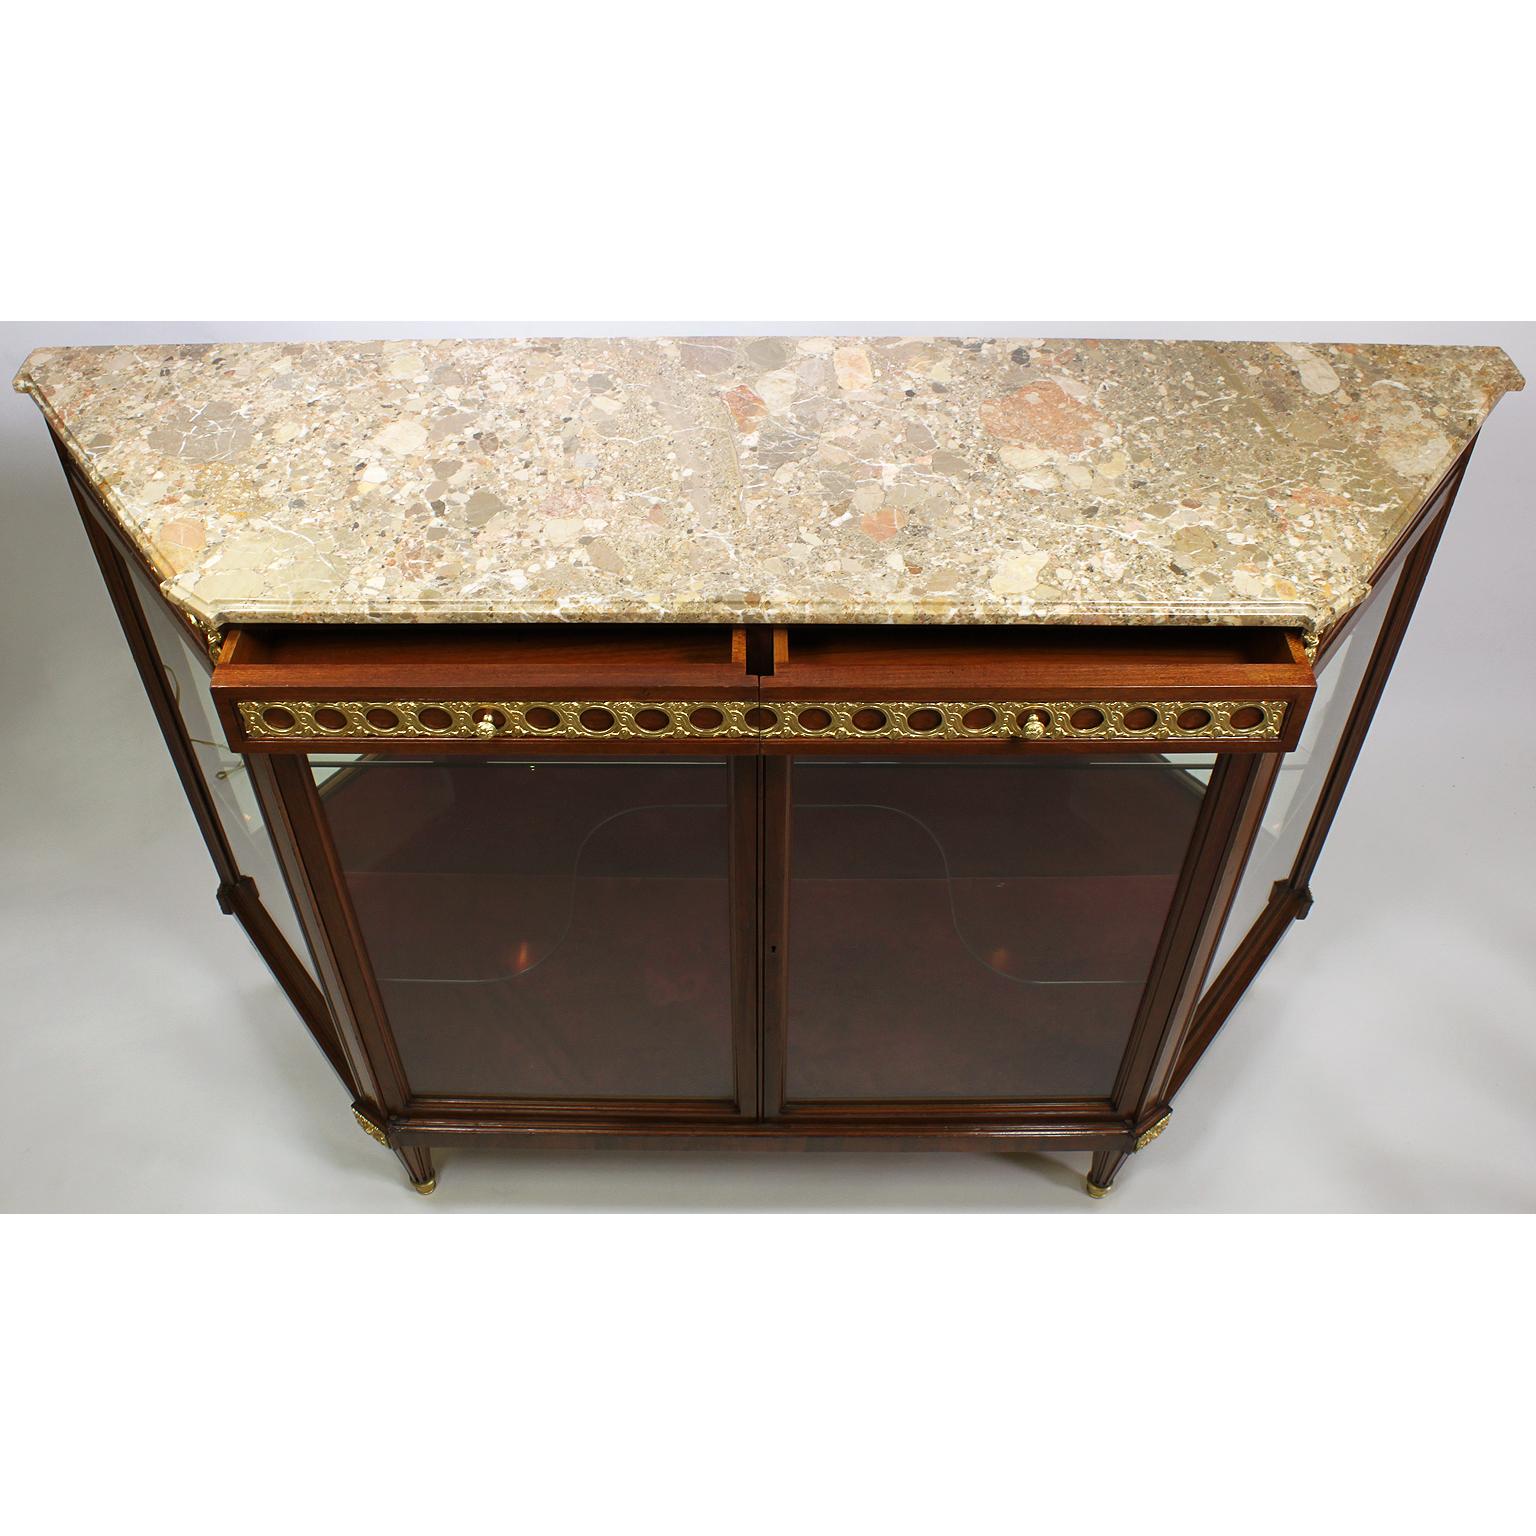 French Louis XVI Style Mahogany and Gilt-Bronze Mounted Sever Exhibition Vitrine For Sale 3